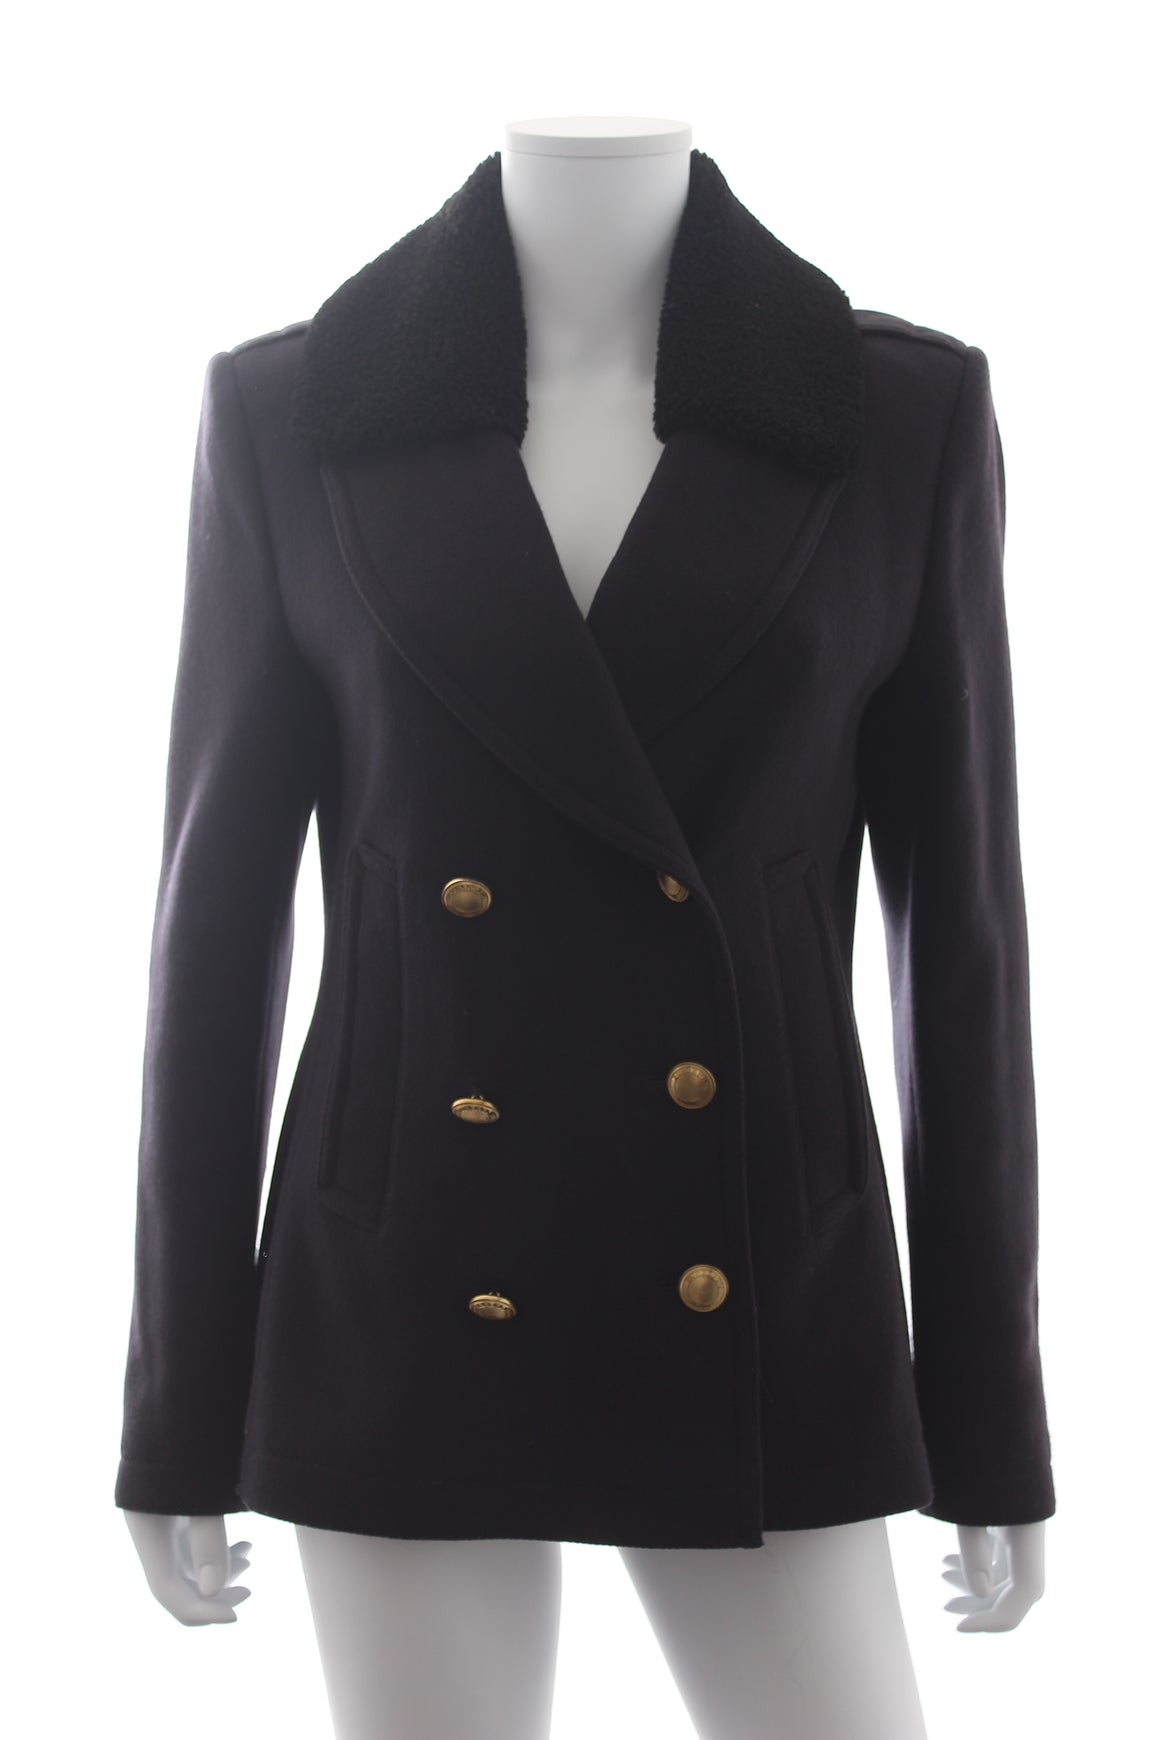 Burberry Shearling-Collar Double-Breasted Wool-Blend Jacket